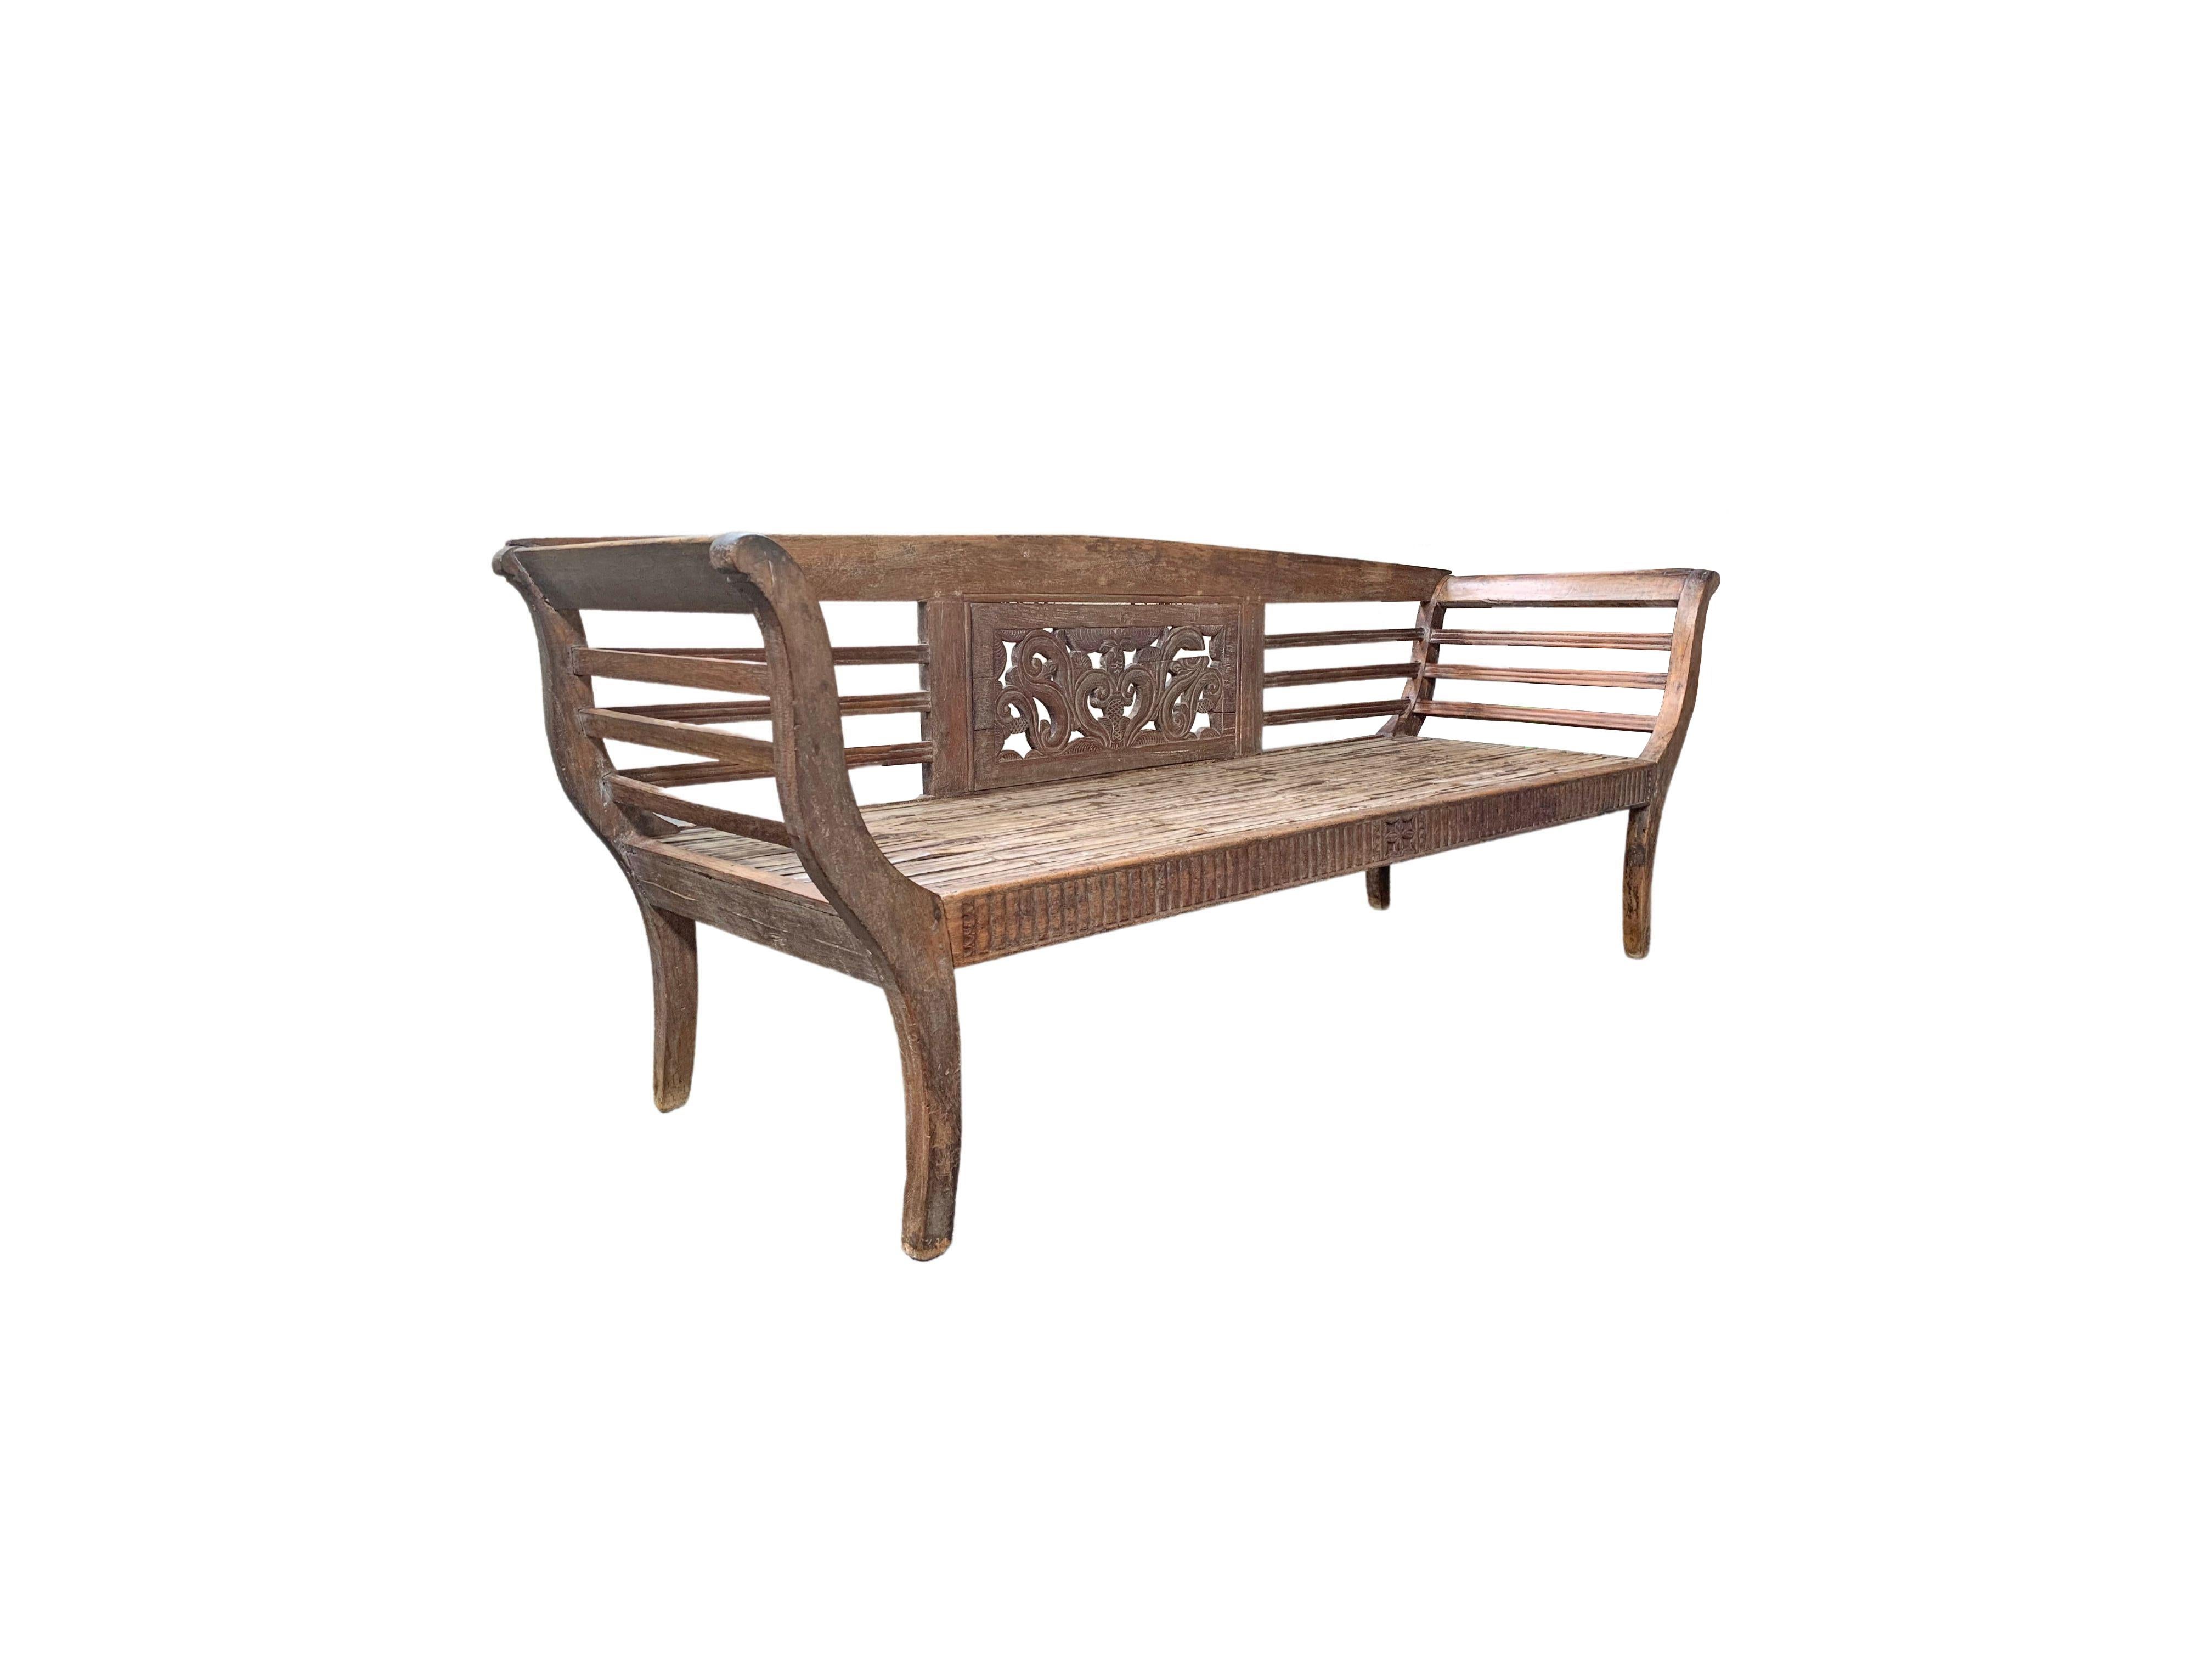 Hand-Carved Teak & Bamboo Bench with Carved Detailing Madura Island, Java, Indonesia c. 1950 For Sale